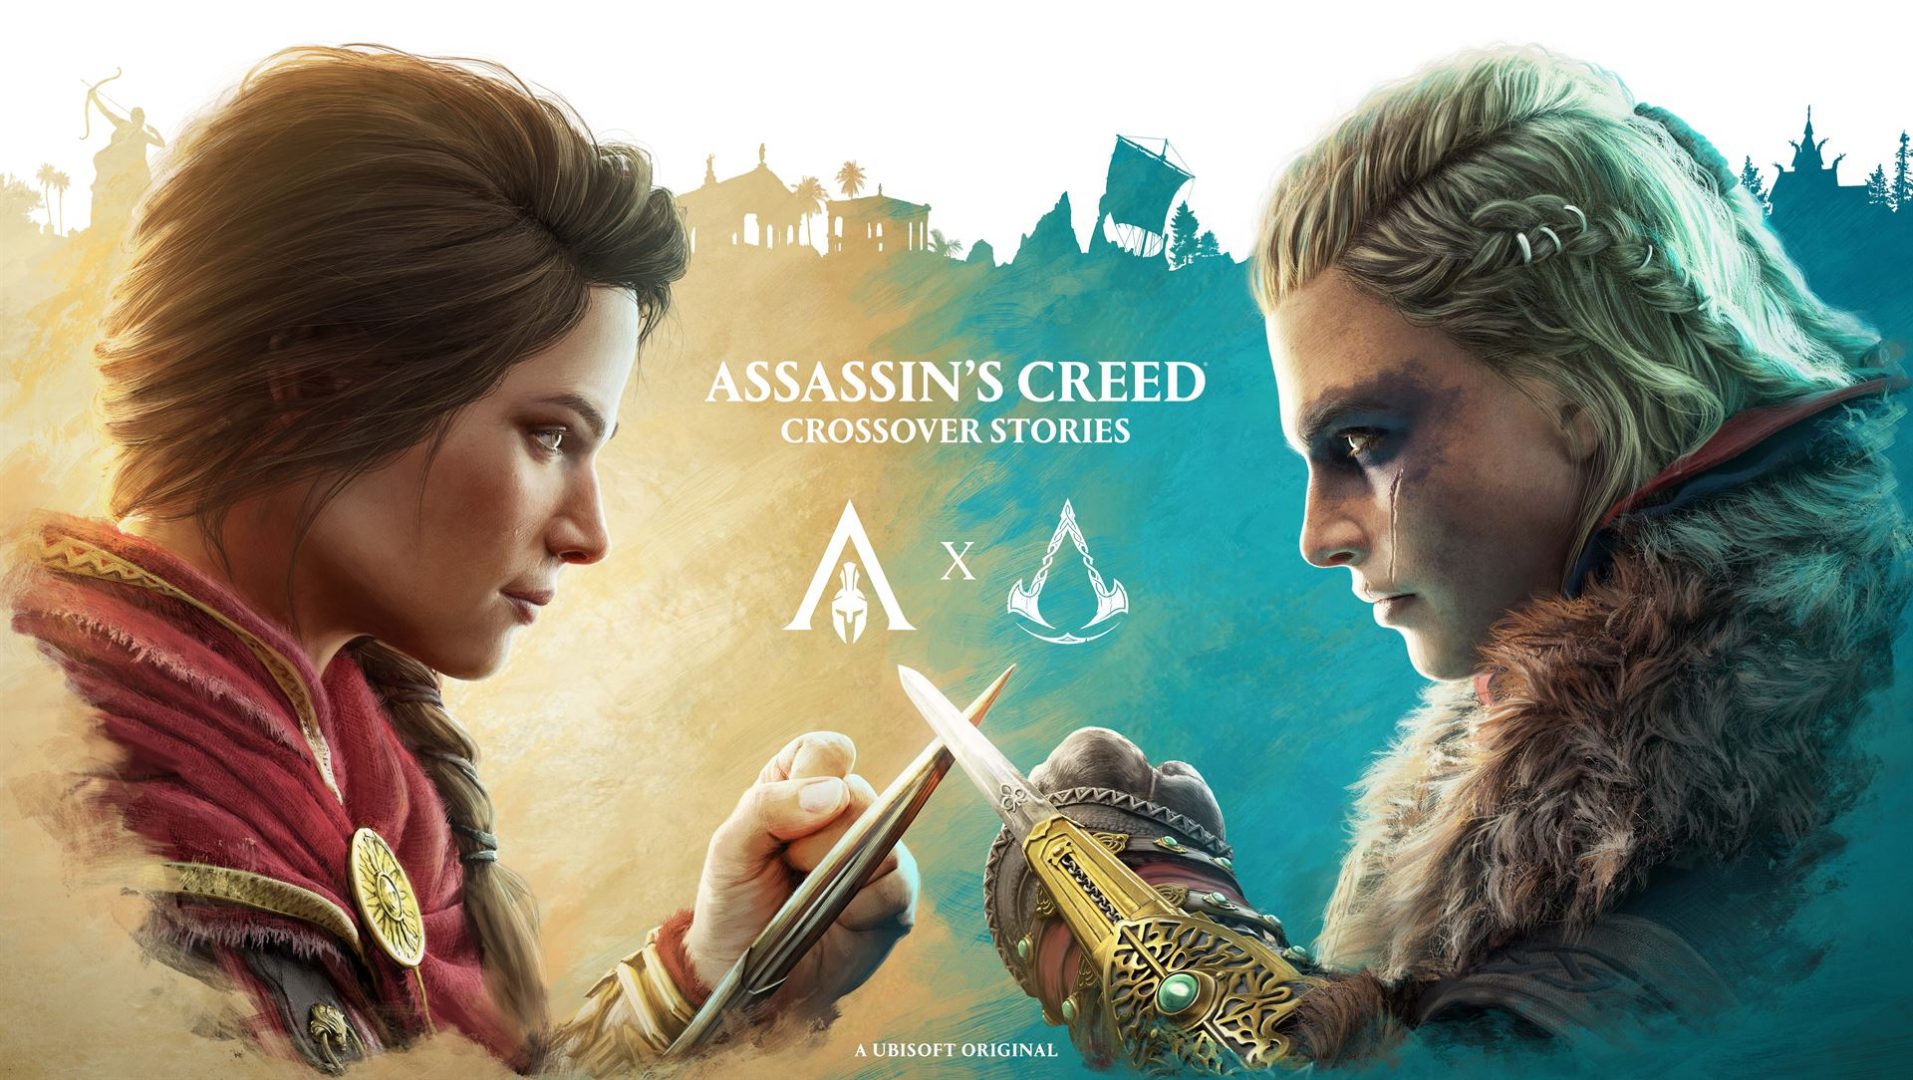 Assassin’s Creed Crossover Stories Featuring Eivor and Kassandra Now Available